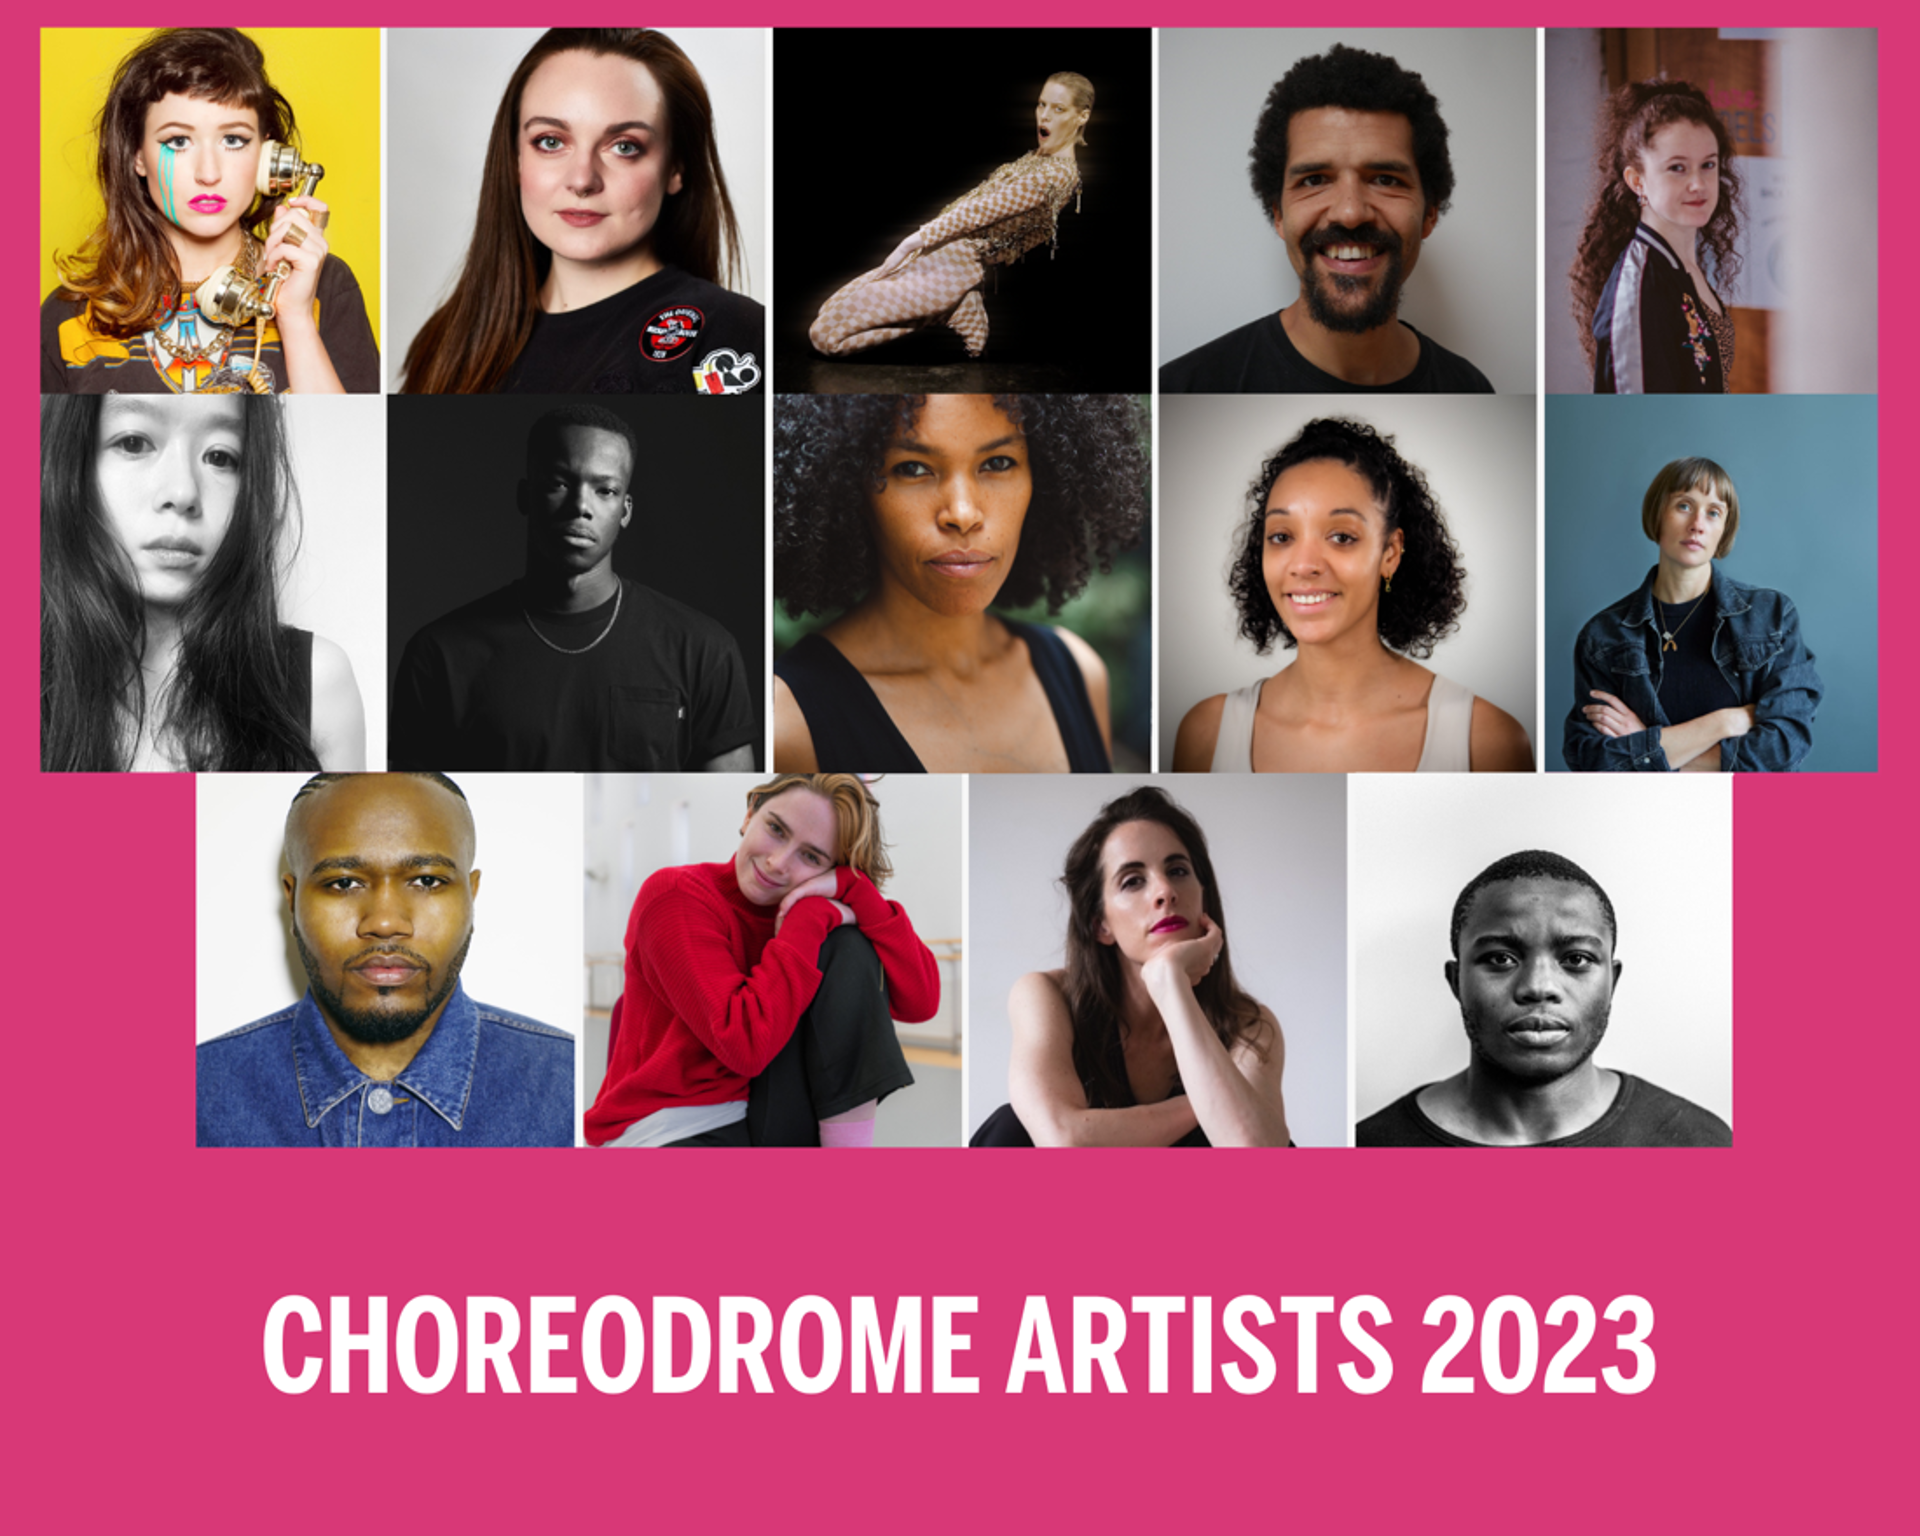 fourteen images in a collage of the choreodrome artists of 2023